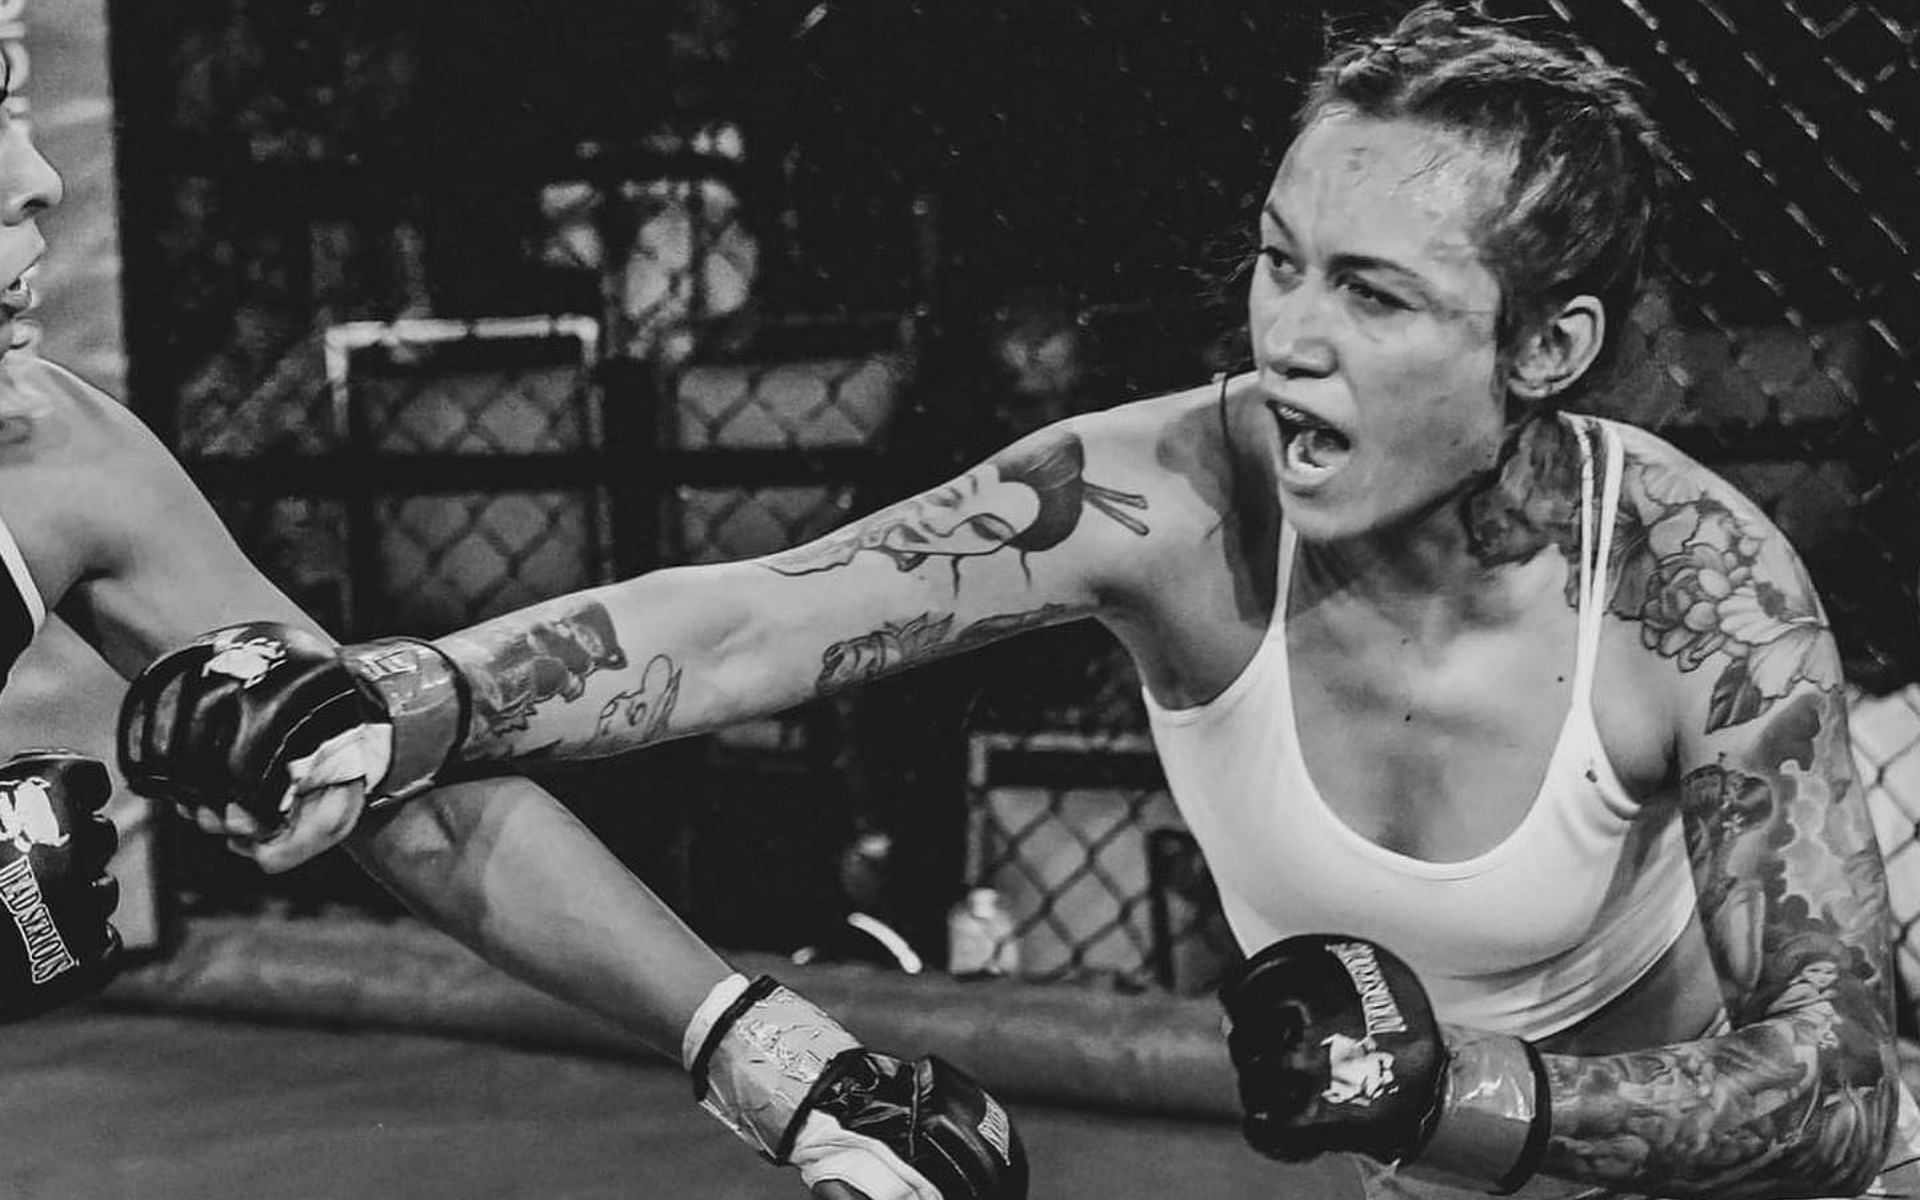 Strawweight prospect Sherry Schmidt has passed away after a tragic car accident [Image Credit: Instagram.com/@ohhsherry_]